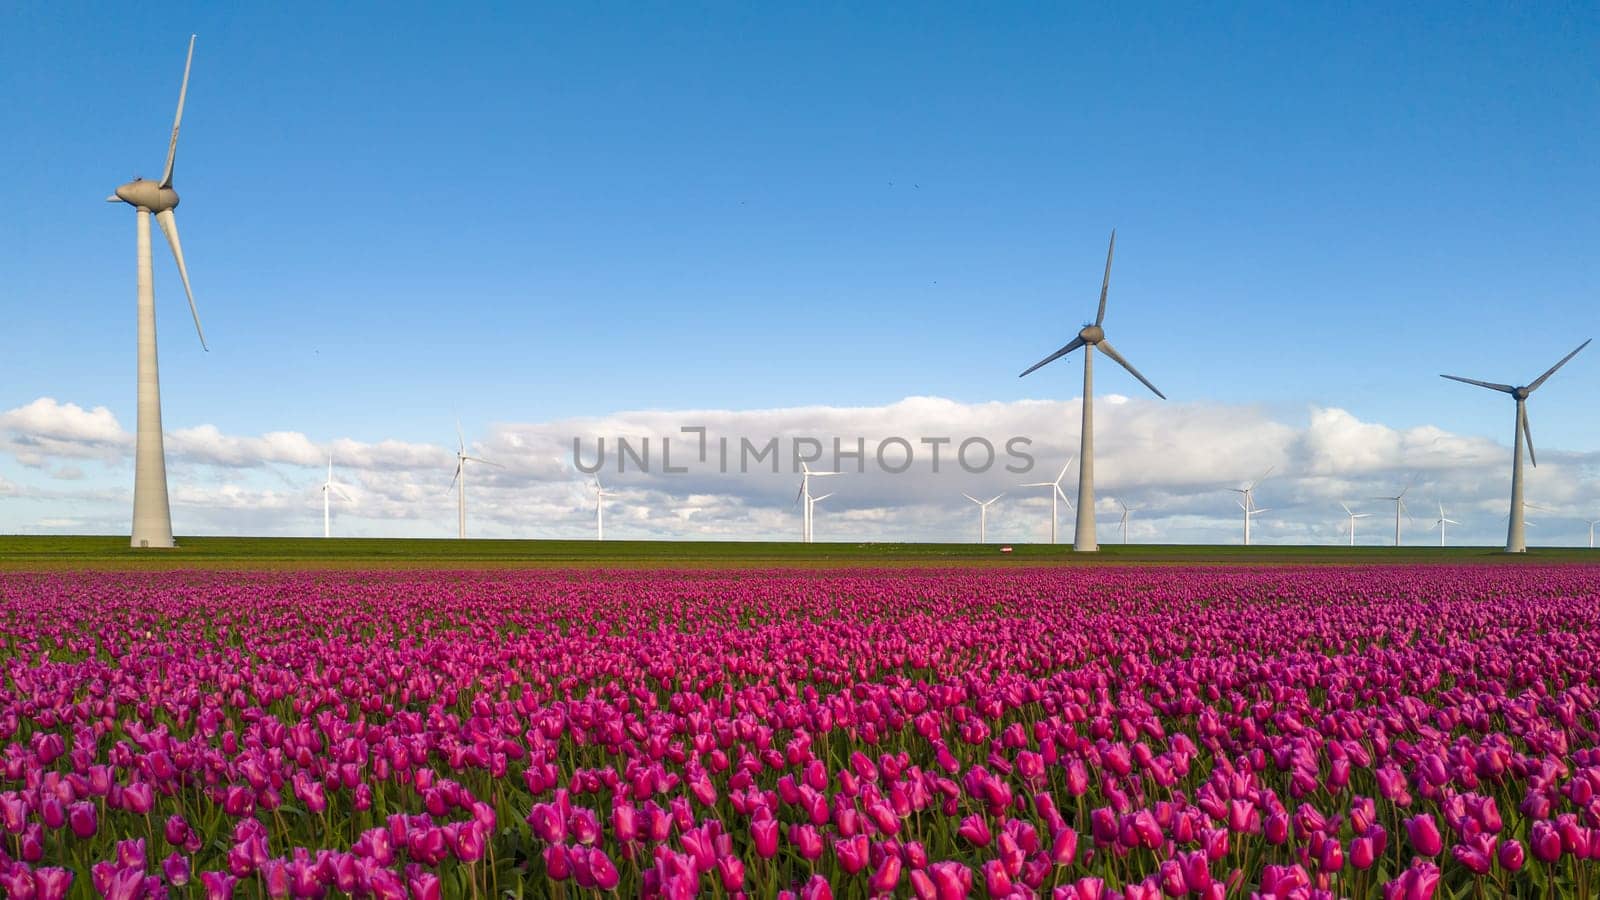 A vibrant field with purple tulip flowers swaying in the wind alongside majestic windmill turbines, creating a picturesque scene of nature and technology, Noordoostpolder Netherlands